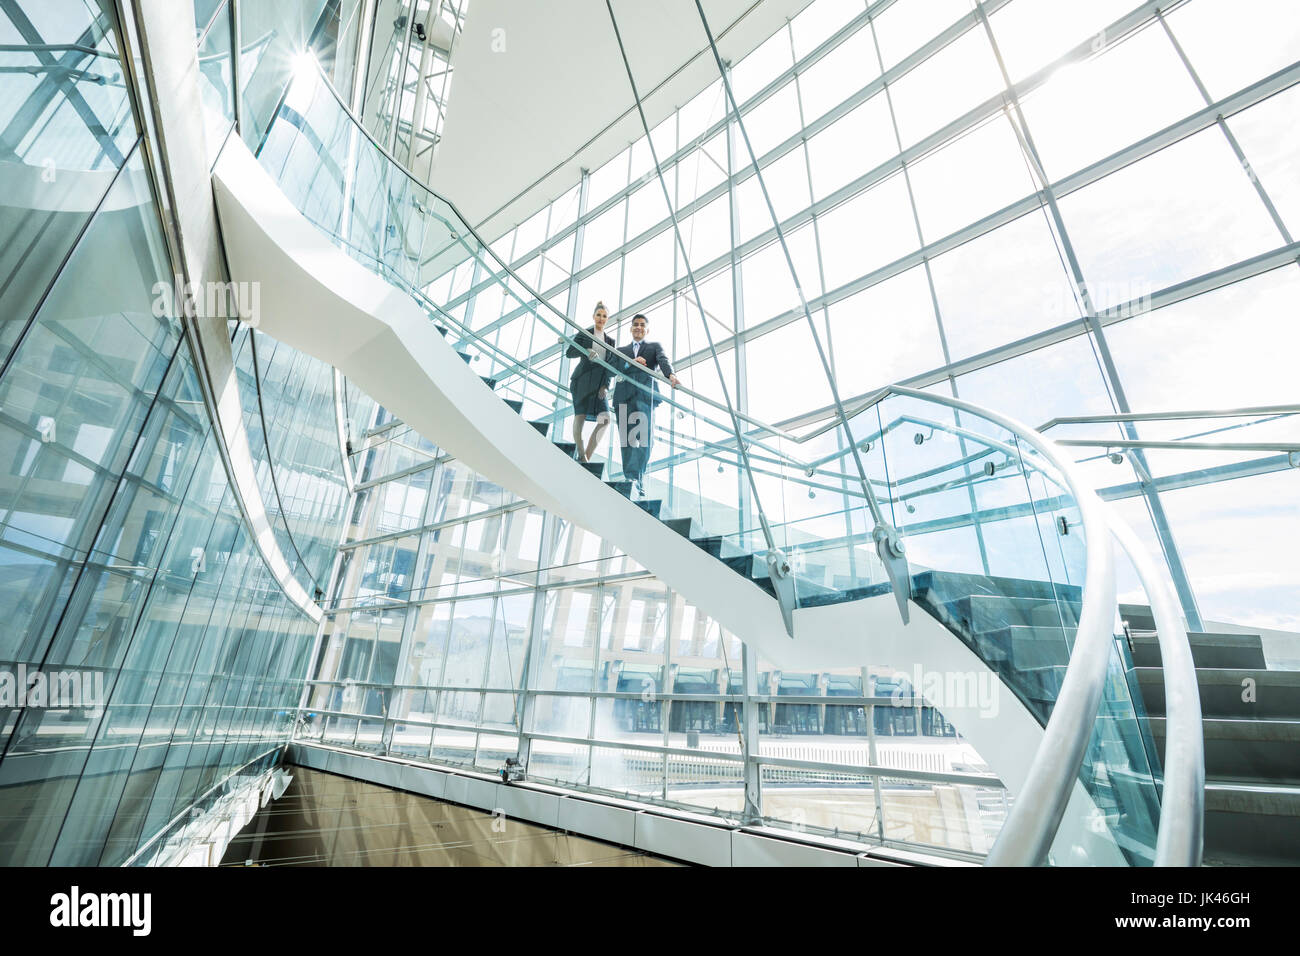 Portrait of distant Mixed Race business people standing on staircase Stock Photo